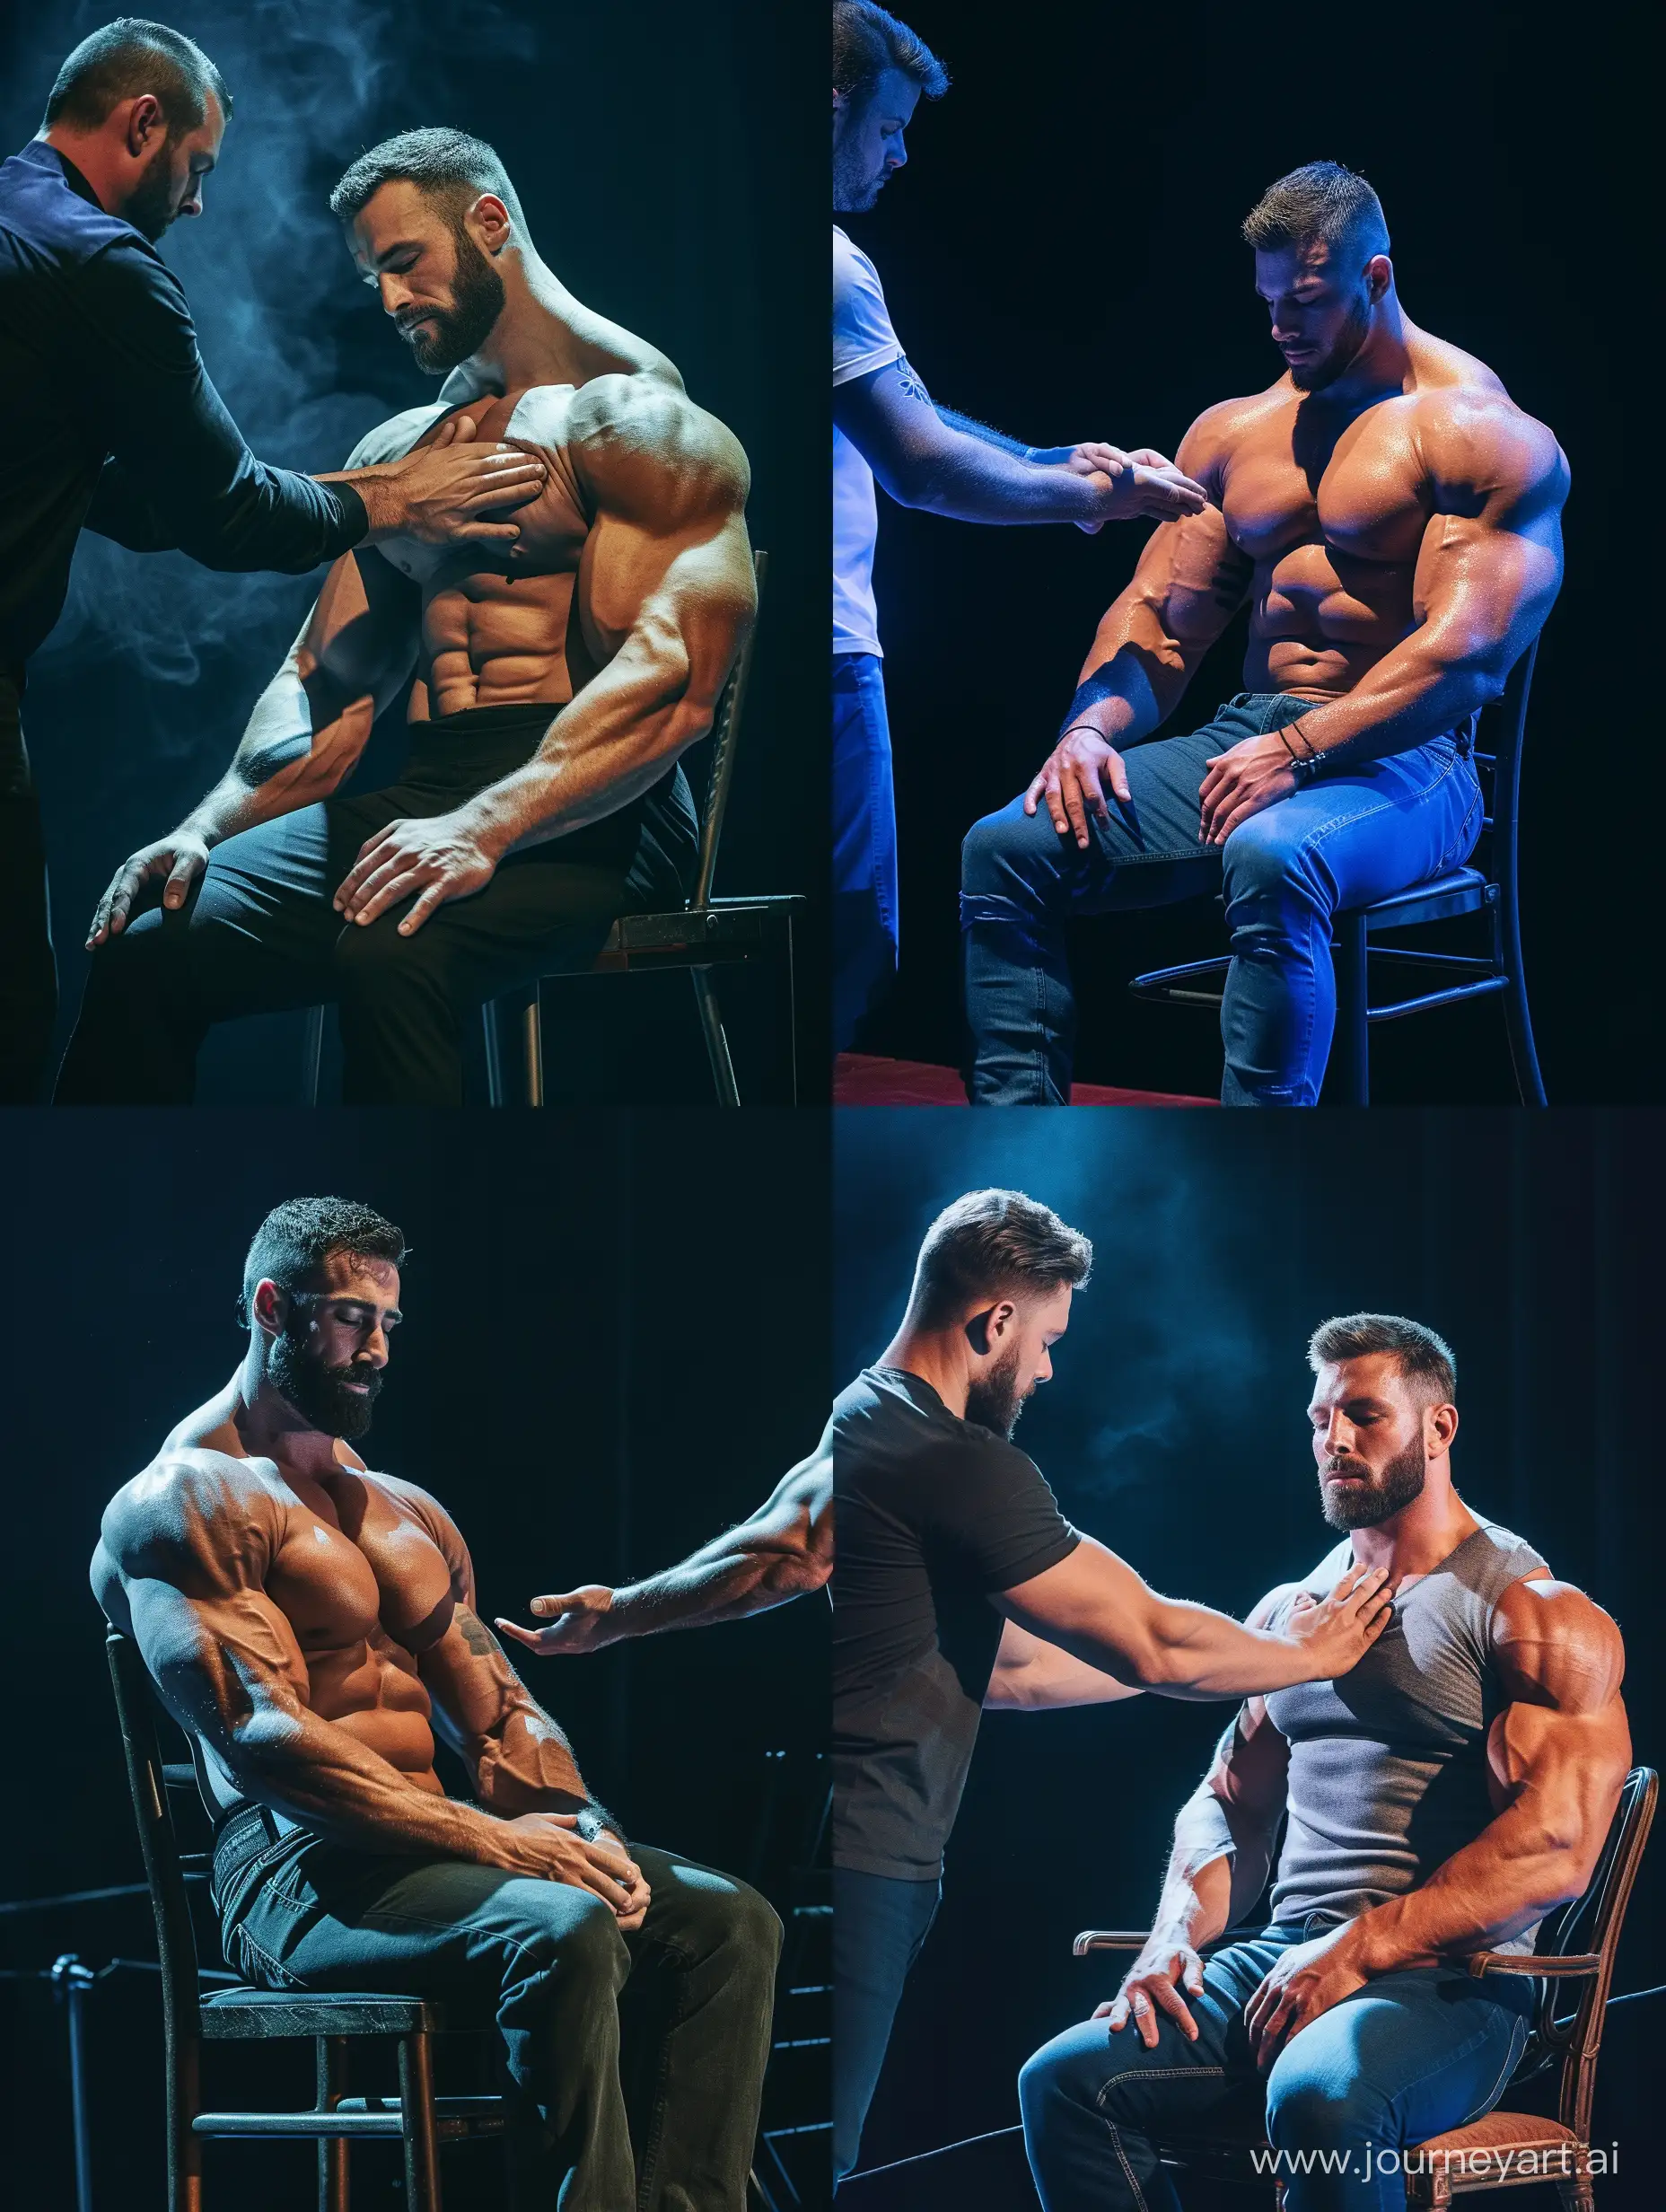 A handsome 25 years old muscular bodybuilder with a stubble, is hypnotized by a buff male hypnotist to feel sleepy in a hypnosis show. the bodybuilder is sitting on a chair on a stage with his eyes closed, while the hypnotist is shaking the bodybuilder’s hand.